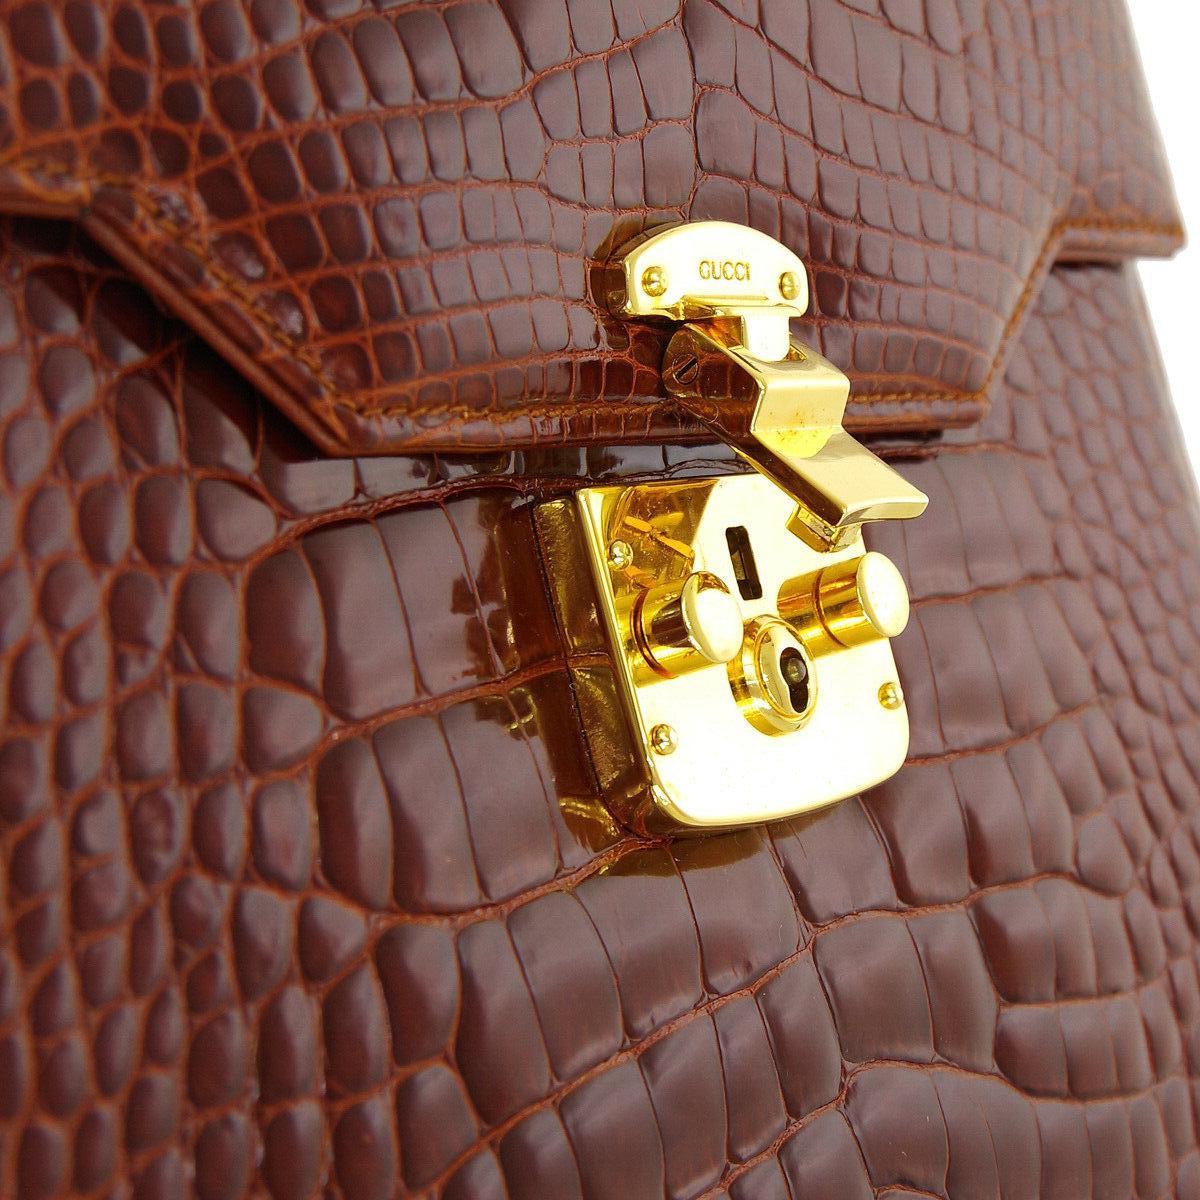 Gucci Crocodile Exotic Leather Gold Evening Top Handle Satchel Kelly Style Shoulder Bag

Crocodile
Gold tone hardware
Leather lining
Pushlock closure
Made in Italy
Handle drop 3.5